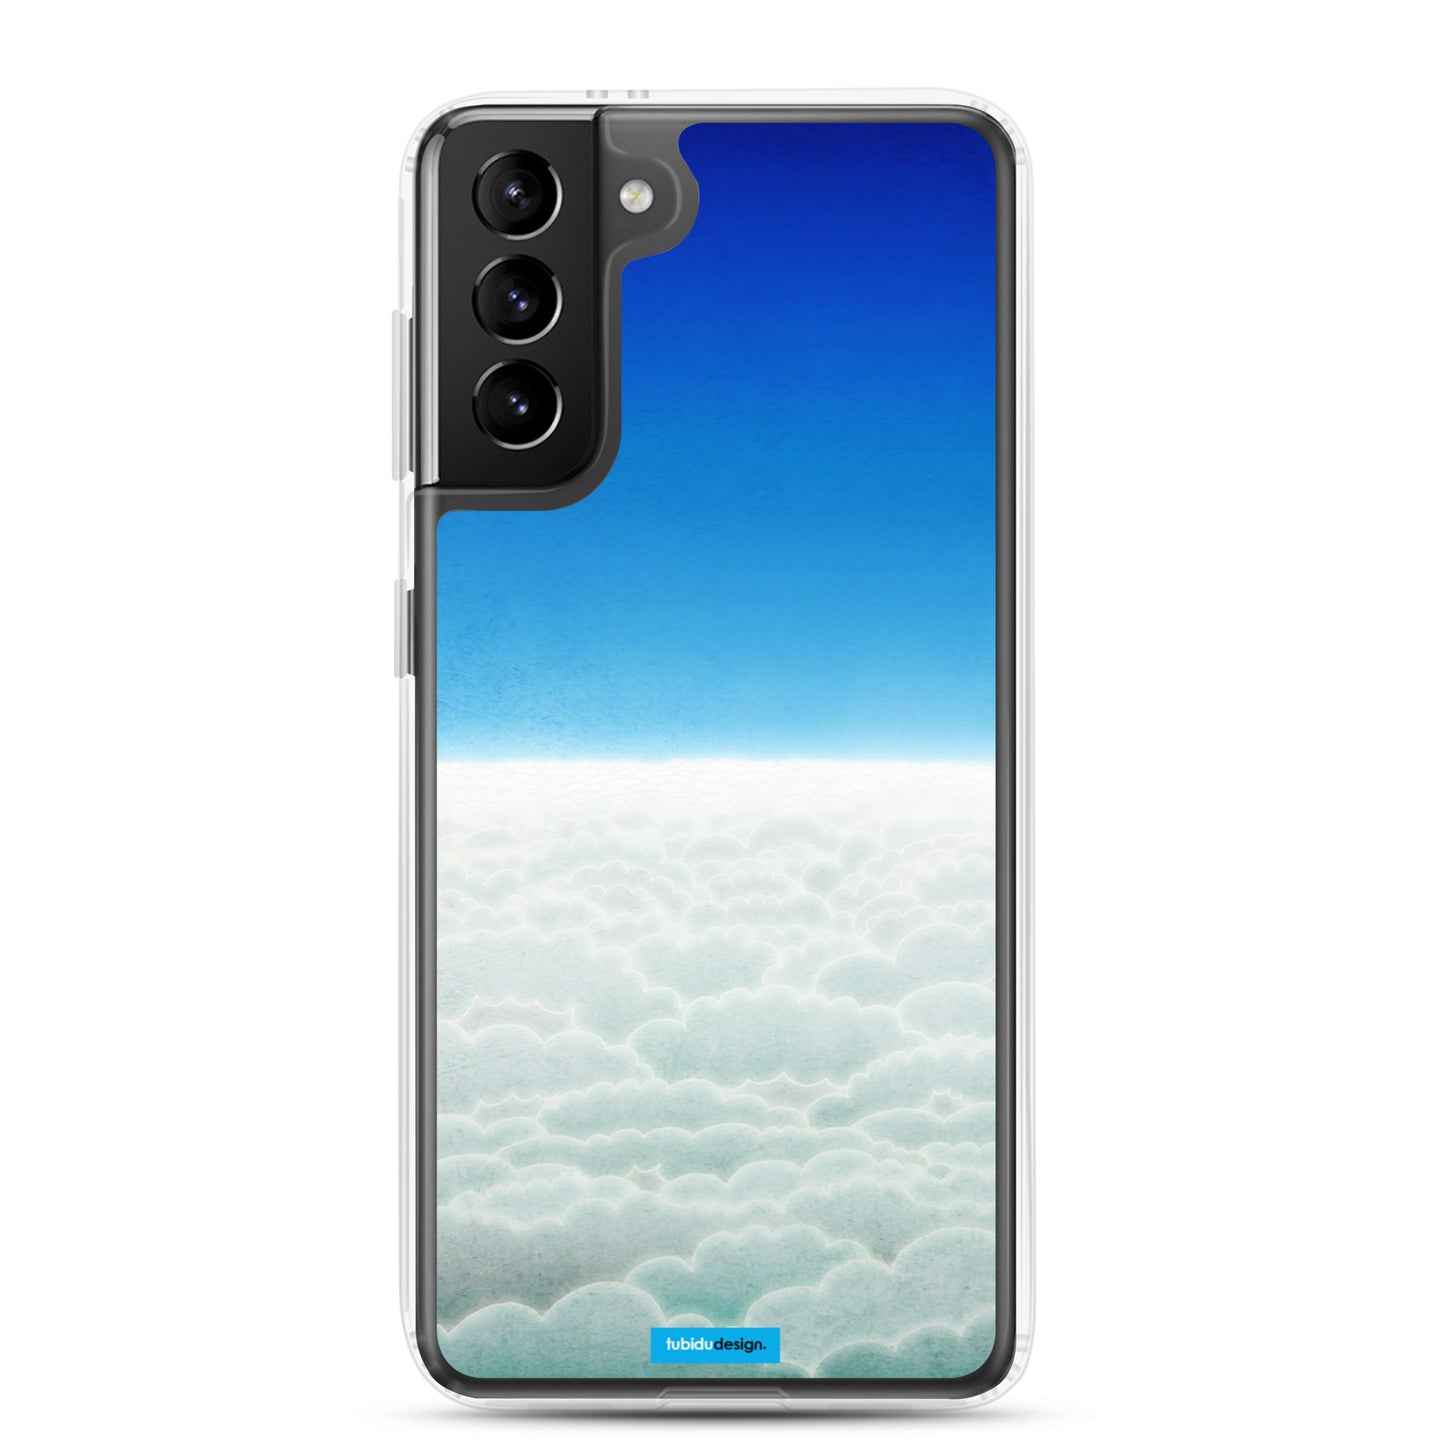 Looking for something - Illustrated Samsung Phone Case